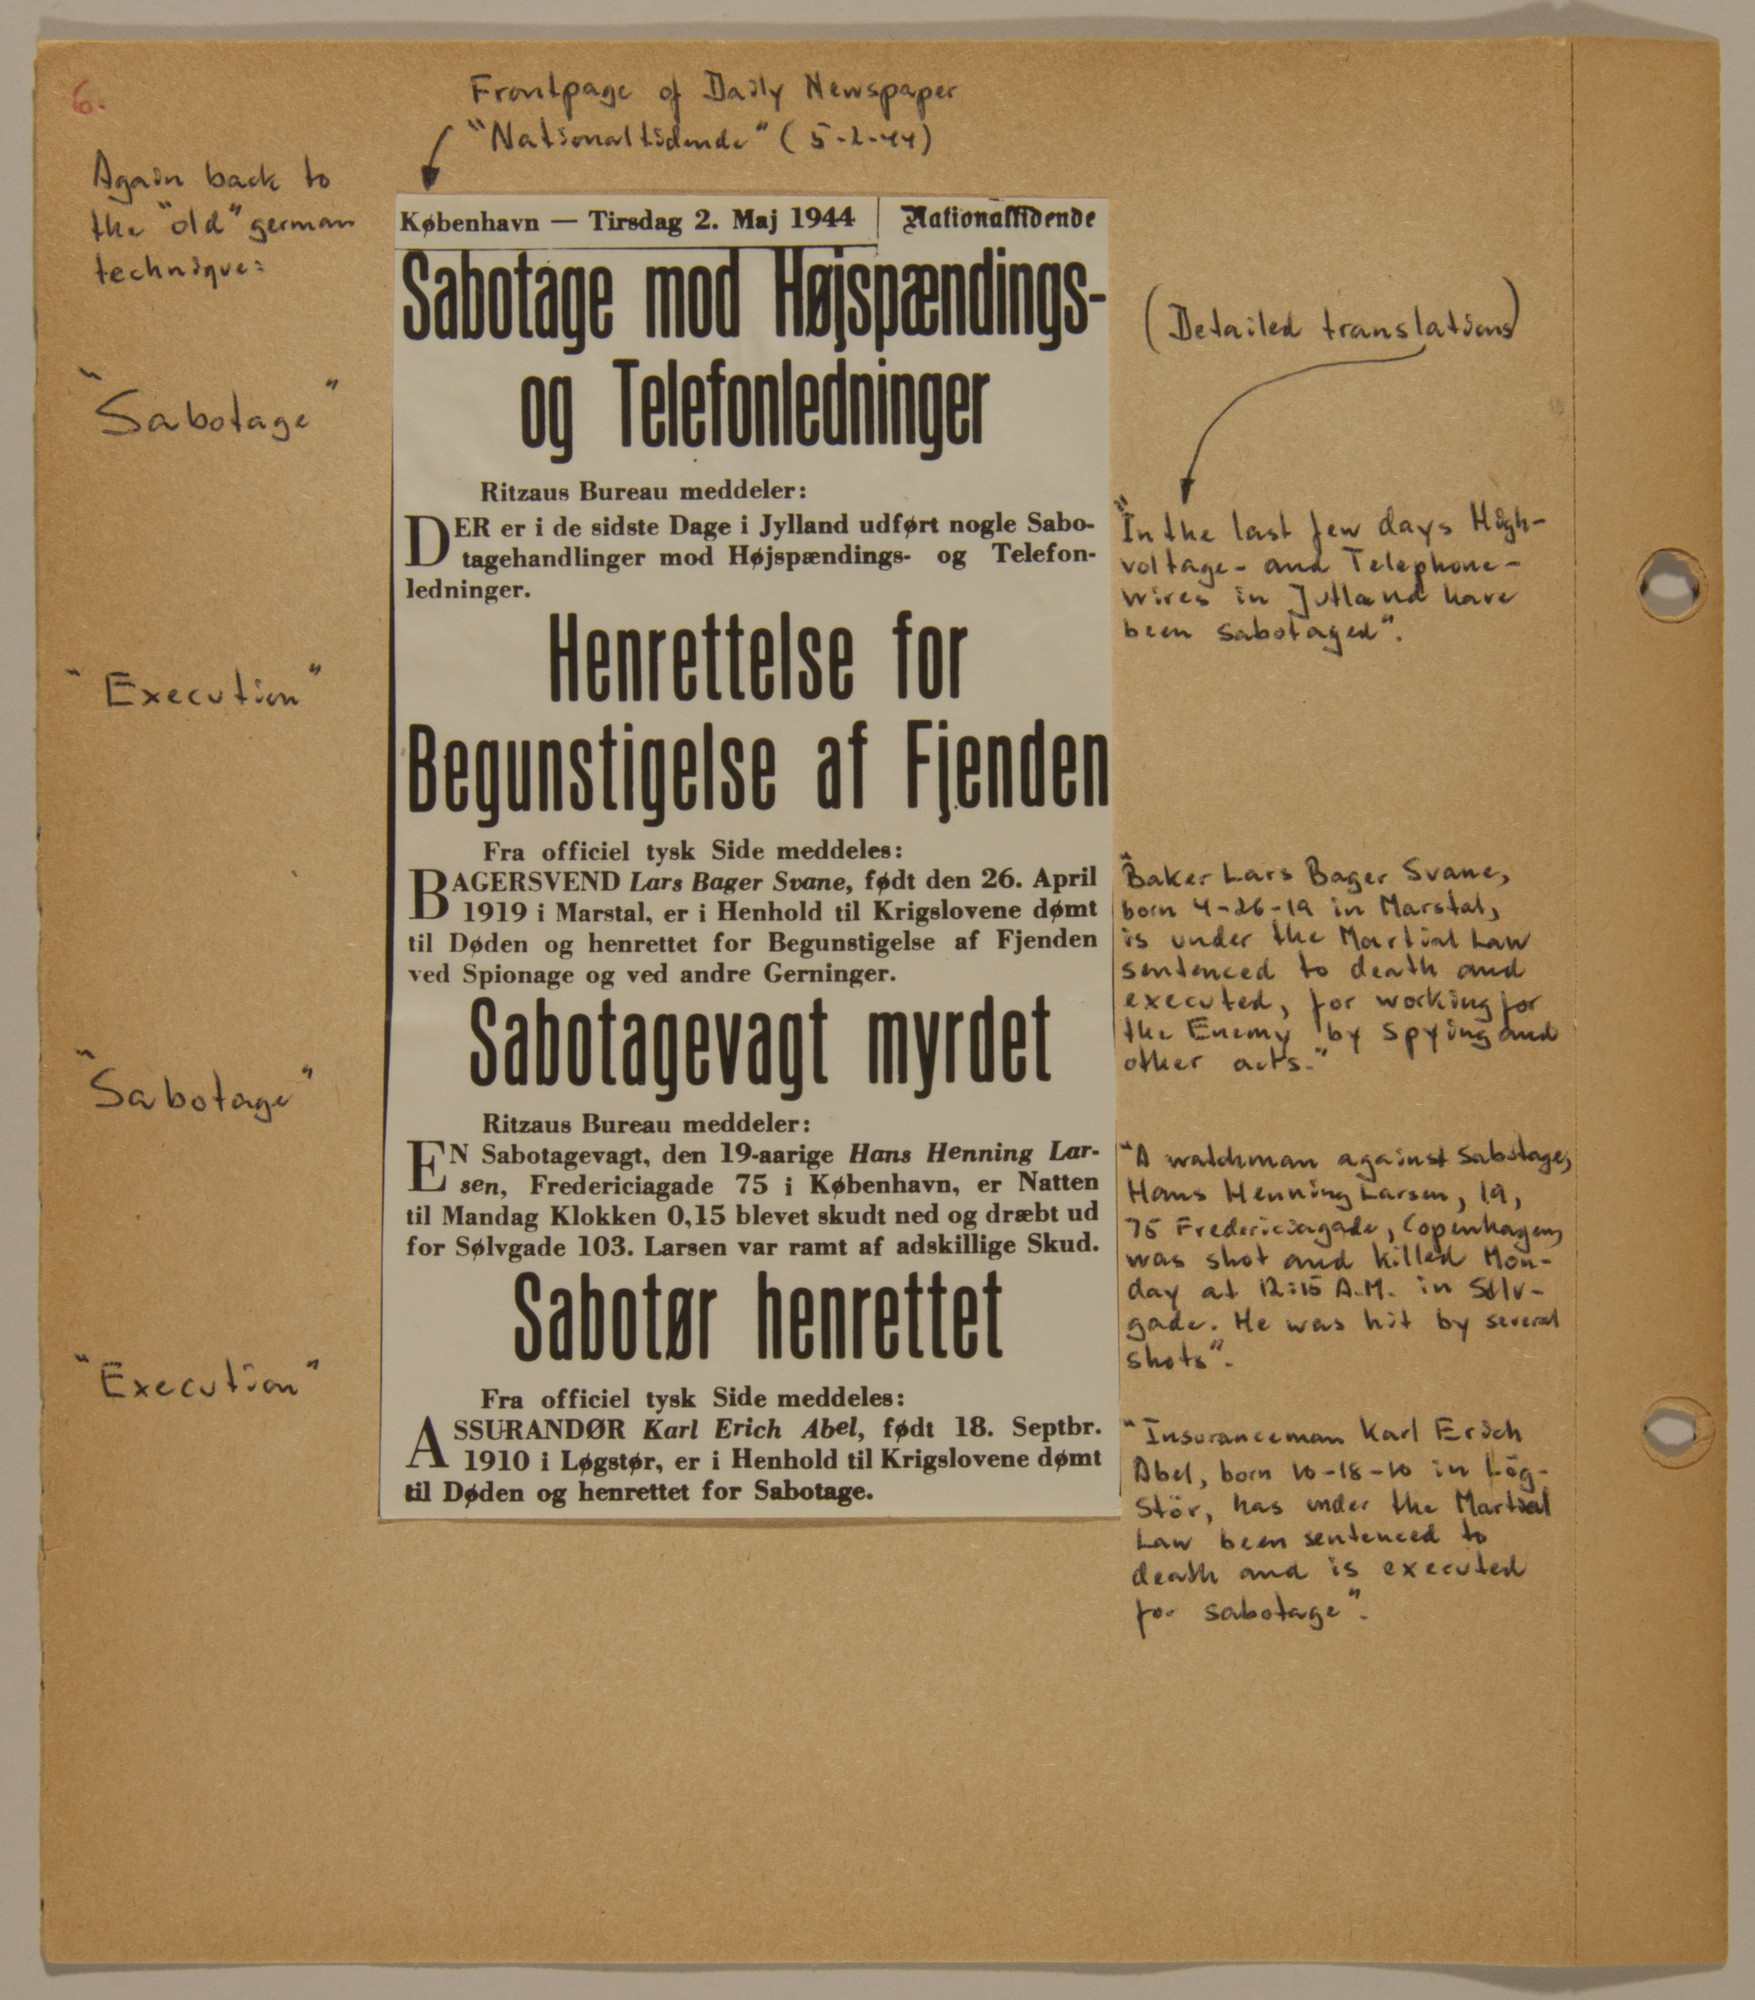 Page from volume five of a set of scrapbooks compiled by Bjorn Sibbern, a Danish policeman and resistance member, documenting the German occupation of Denmark.

This page contains a May 2, 1944 newspaper clipping about sabotage.